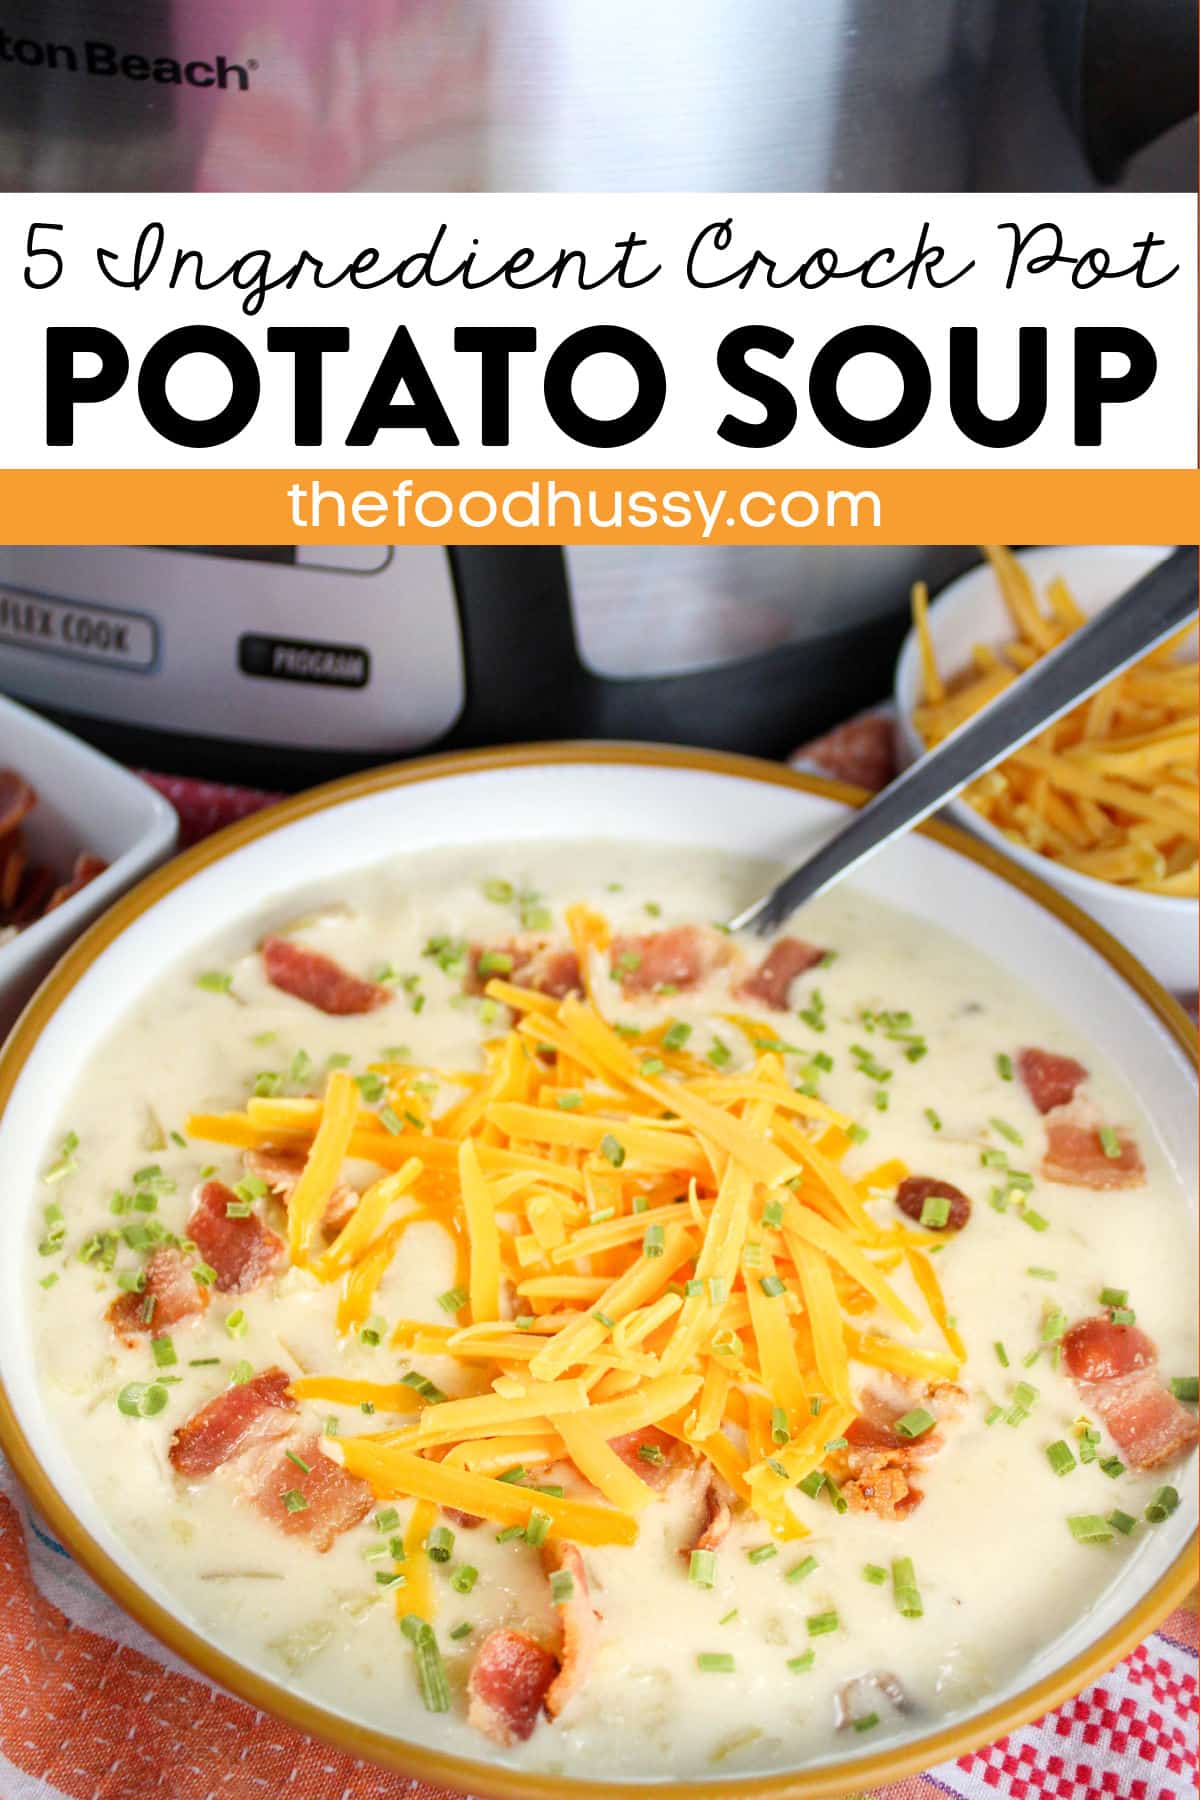 This 5 Ingredient Crock Pot Potato Soup is creamy, chunky and delicious! This is an easy potato soup recipe that tastes so good and the whole family will love - and it's all done in one pot! via @foodhussy